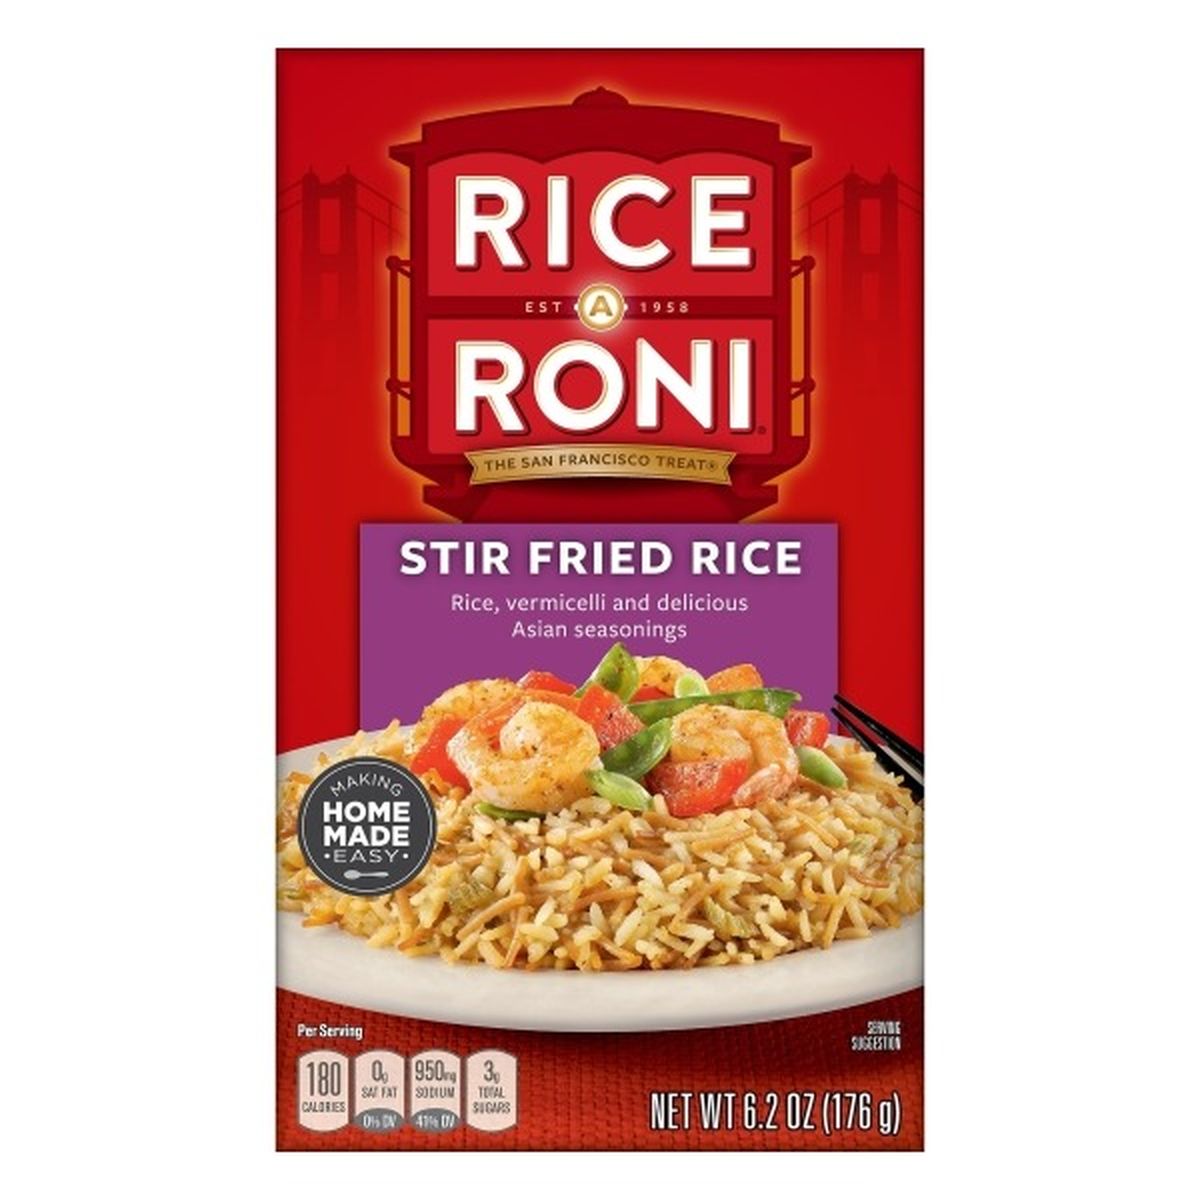 Calories in Rice-a-Roni Stir Fried Rice